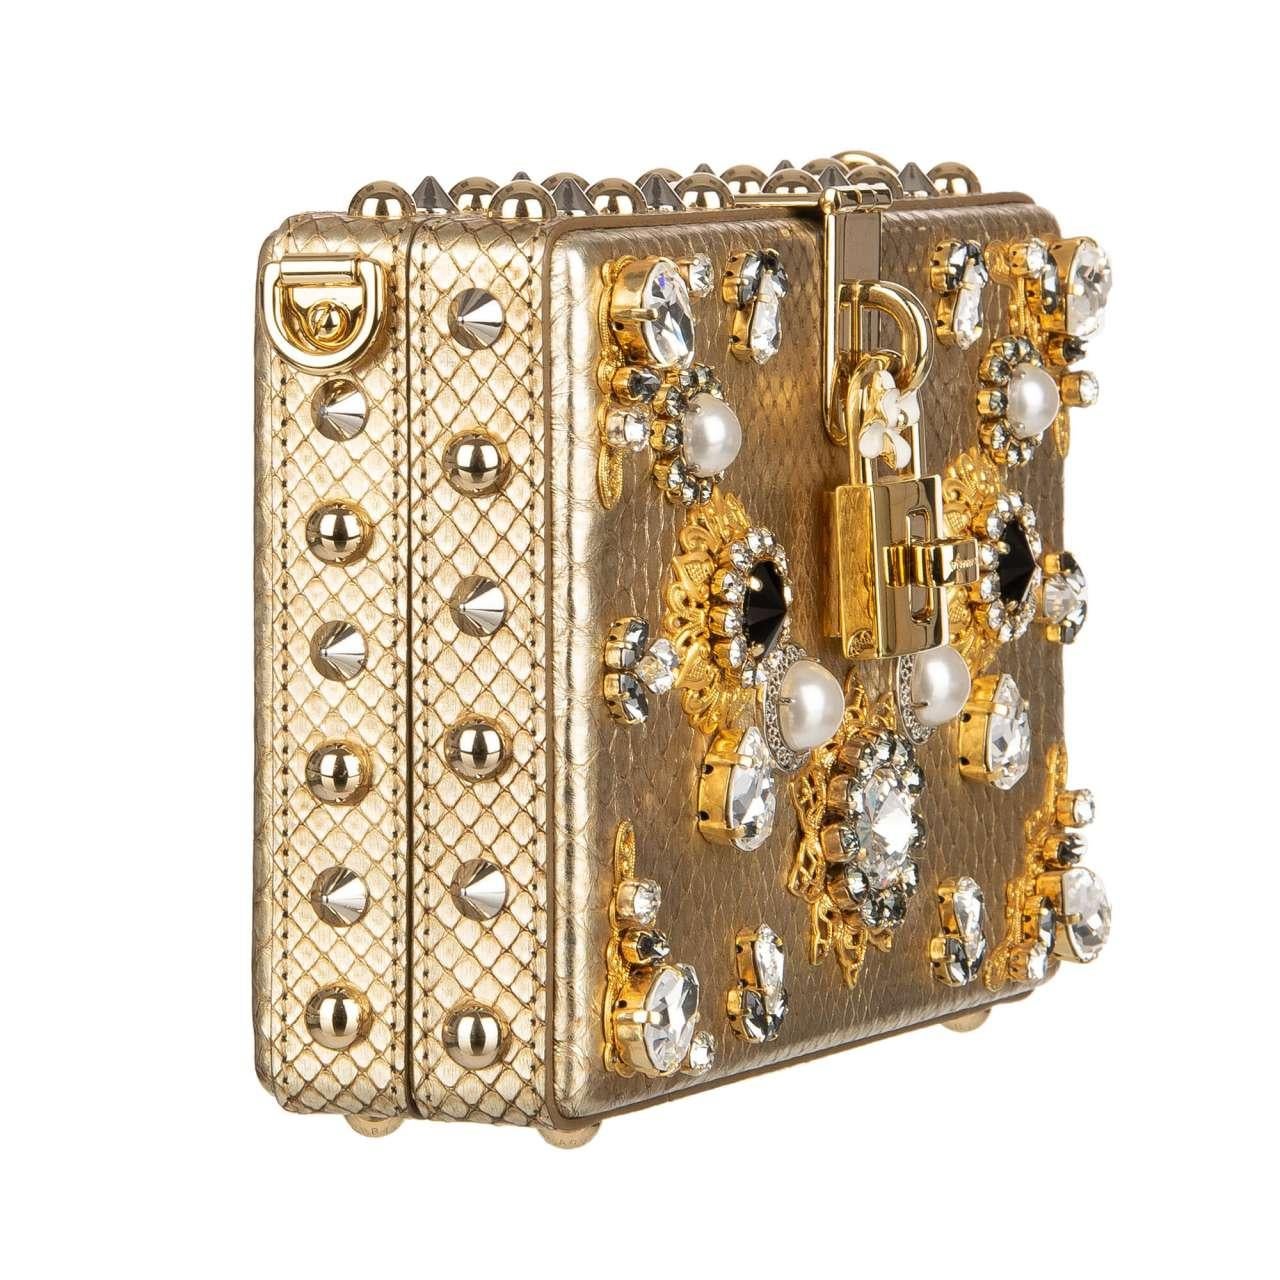 Dolce & Gabbana Unique Jeweled Studded Snakeskin Clutch Bag DOLCE BOX Gold In Excellent Condition For Sale In Erkrath, DE